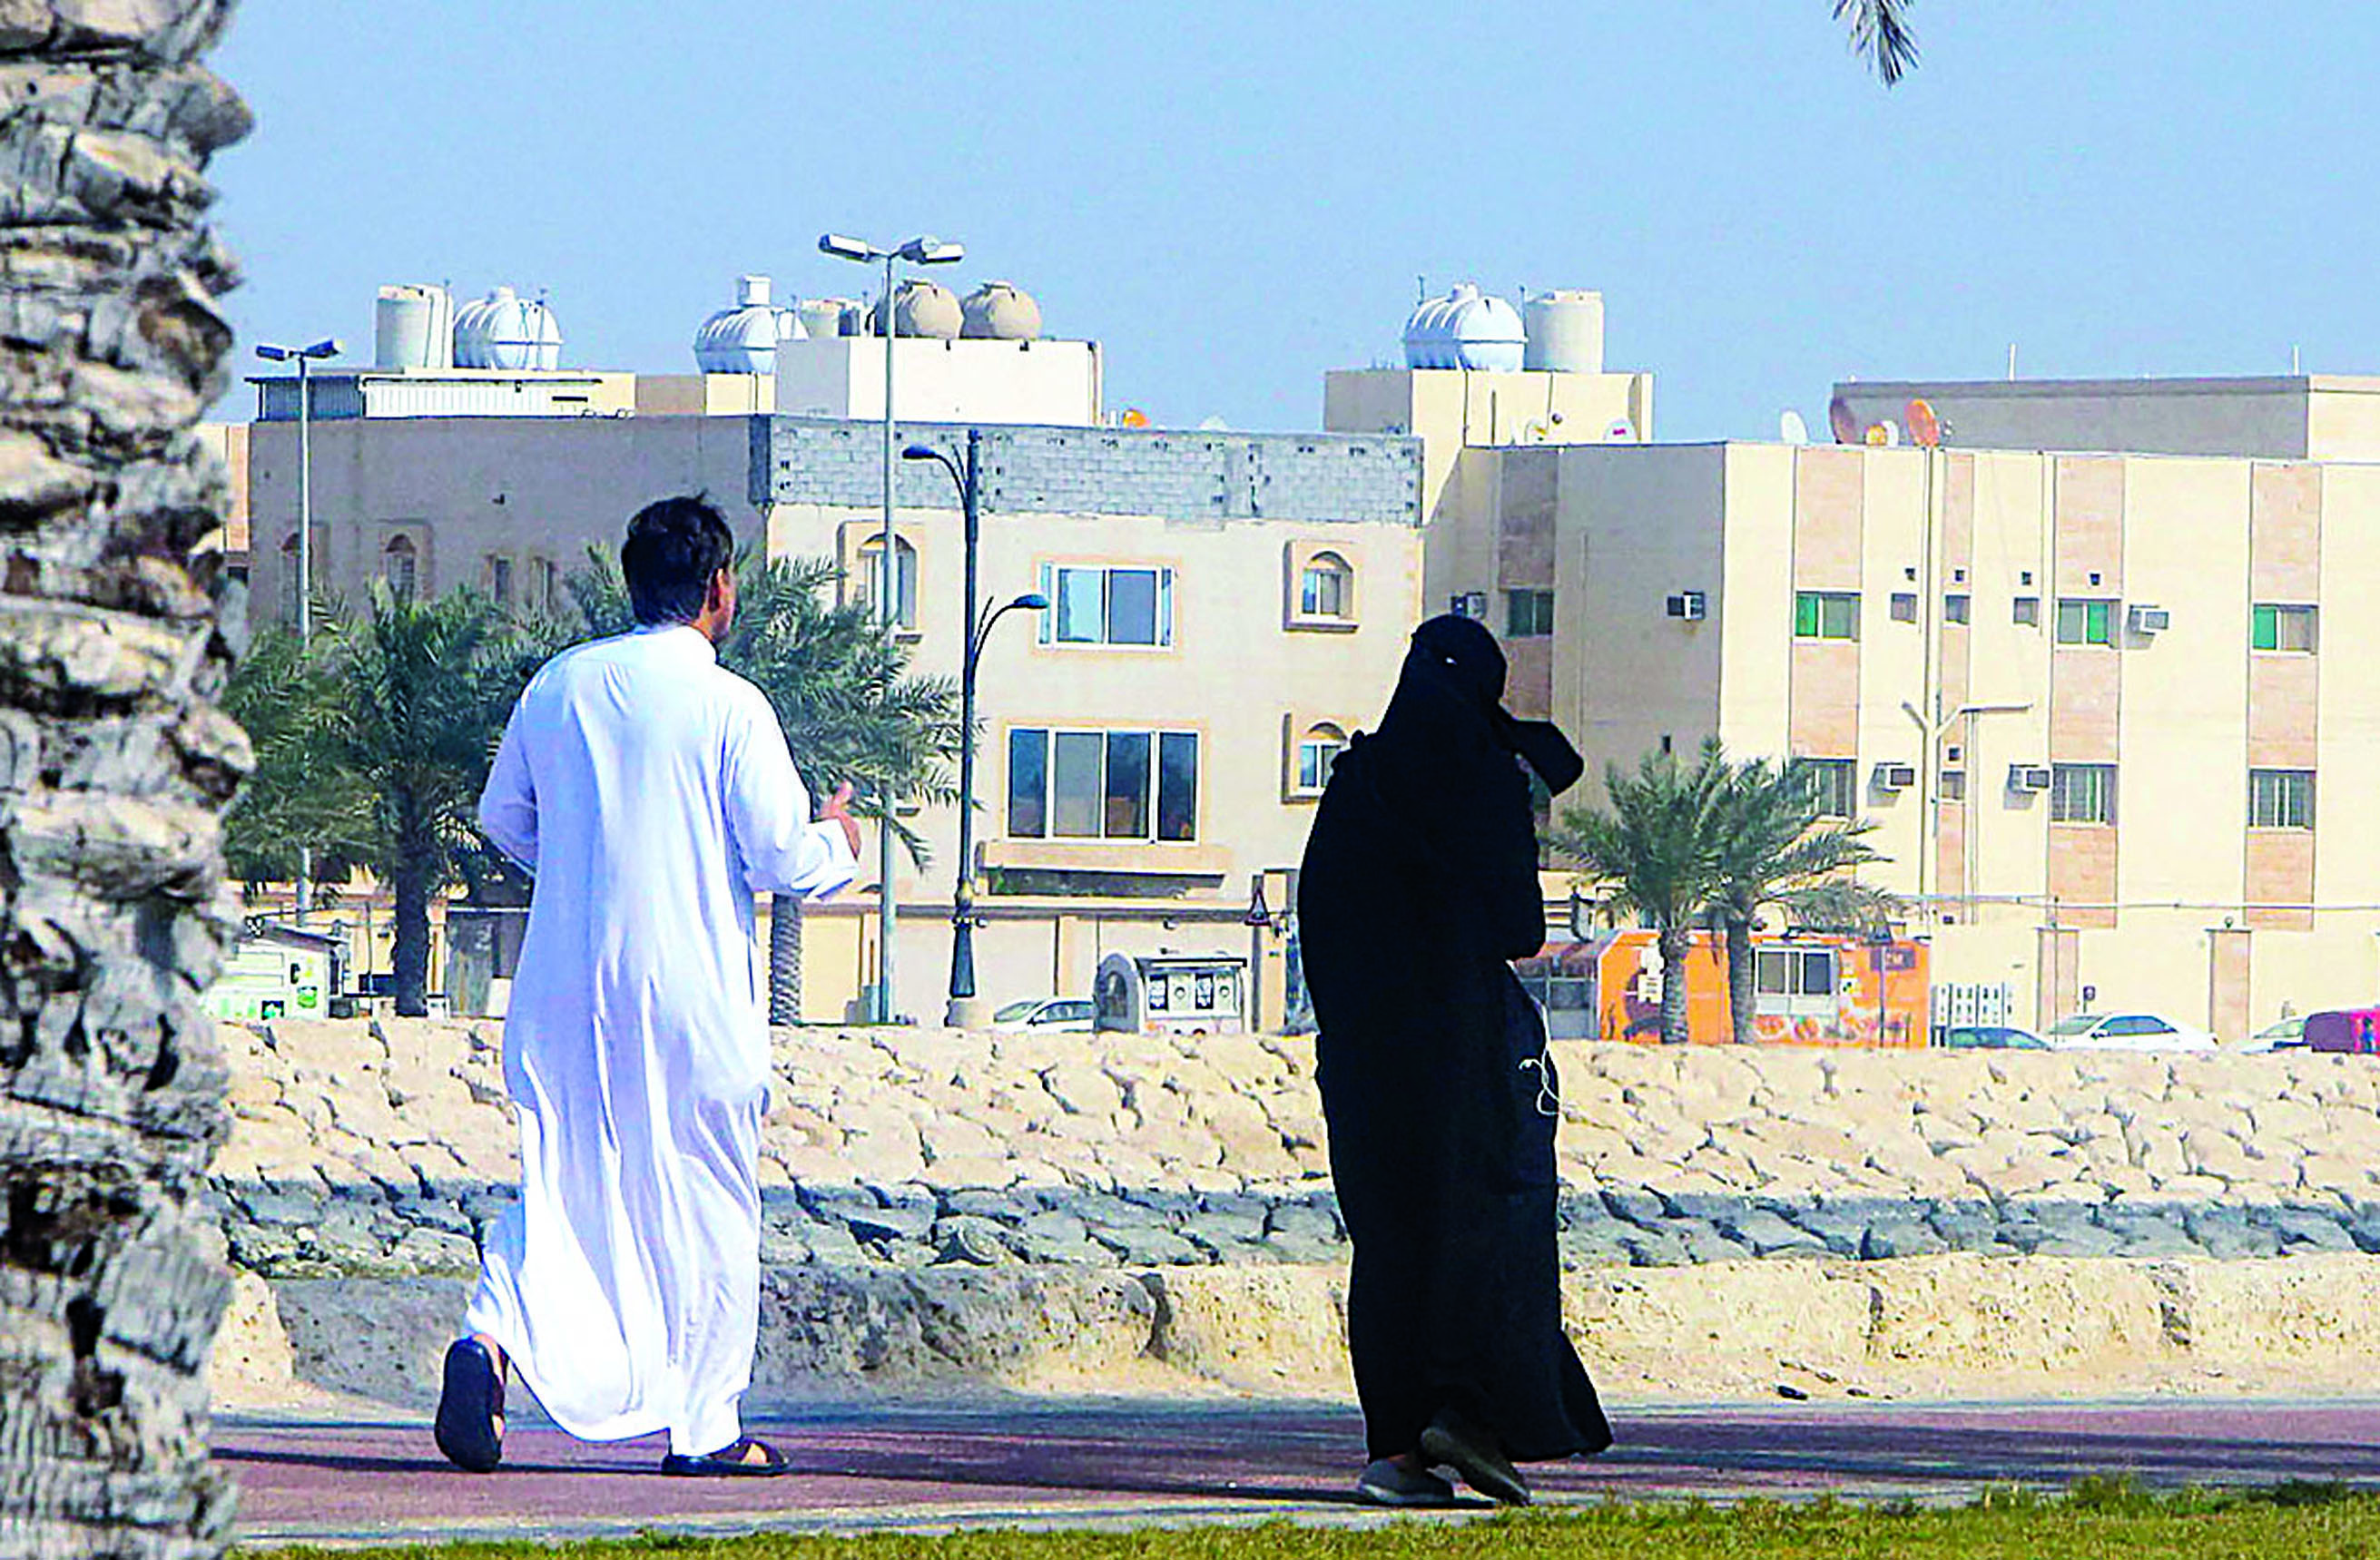 A couple takes a stroll on a sidewalk in Qatif city in Saudi Arabia's Eastern Province, some 400Km from the capital Riyadh, on March 9, 2020. (Photo by STR / AFP)